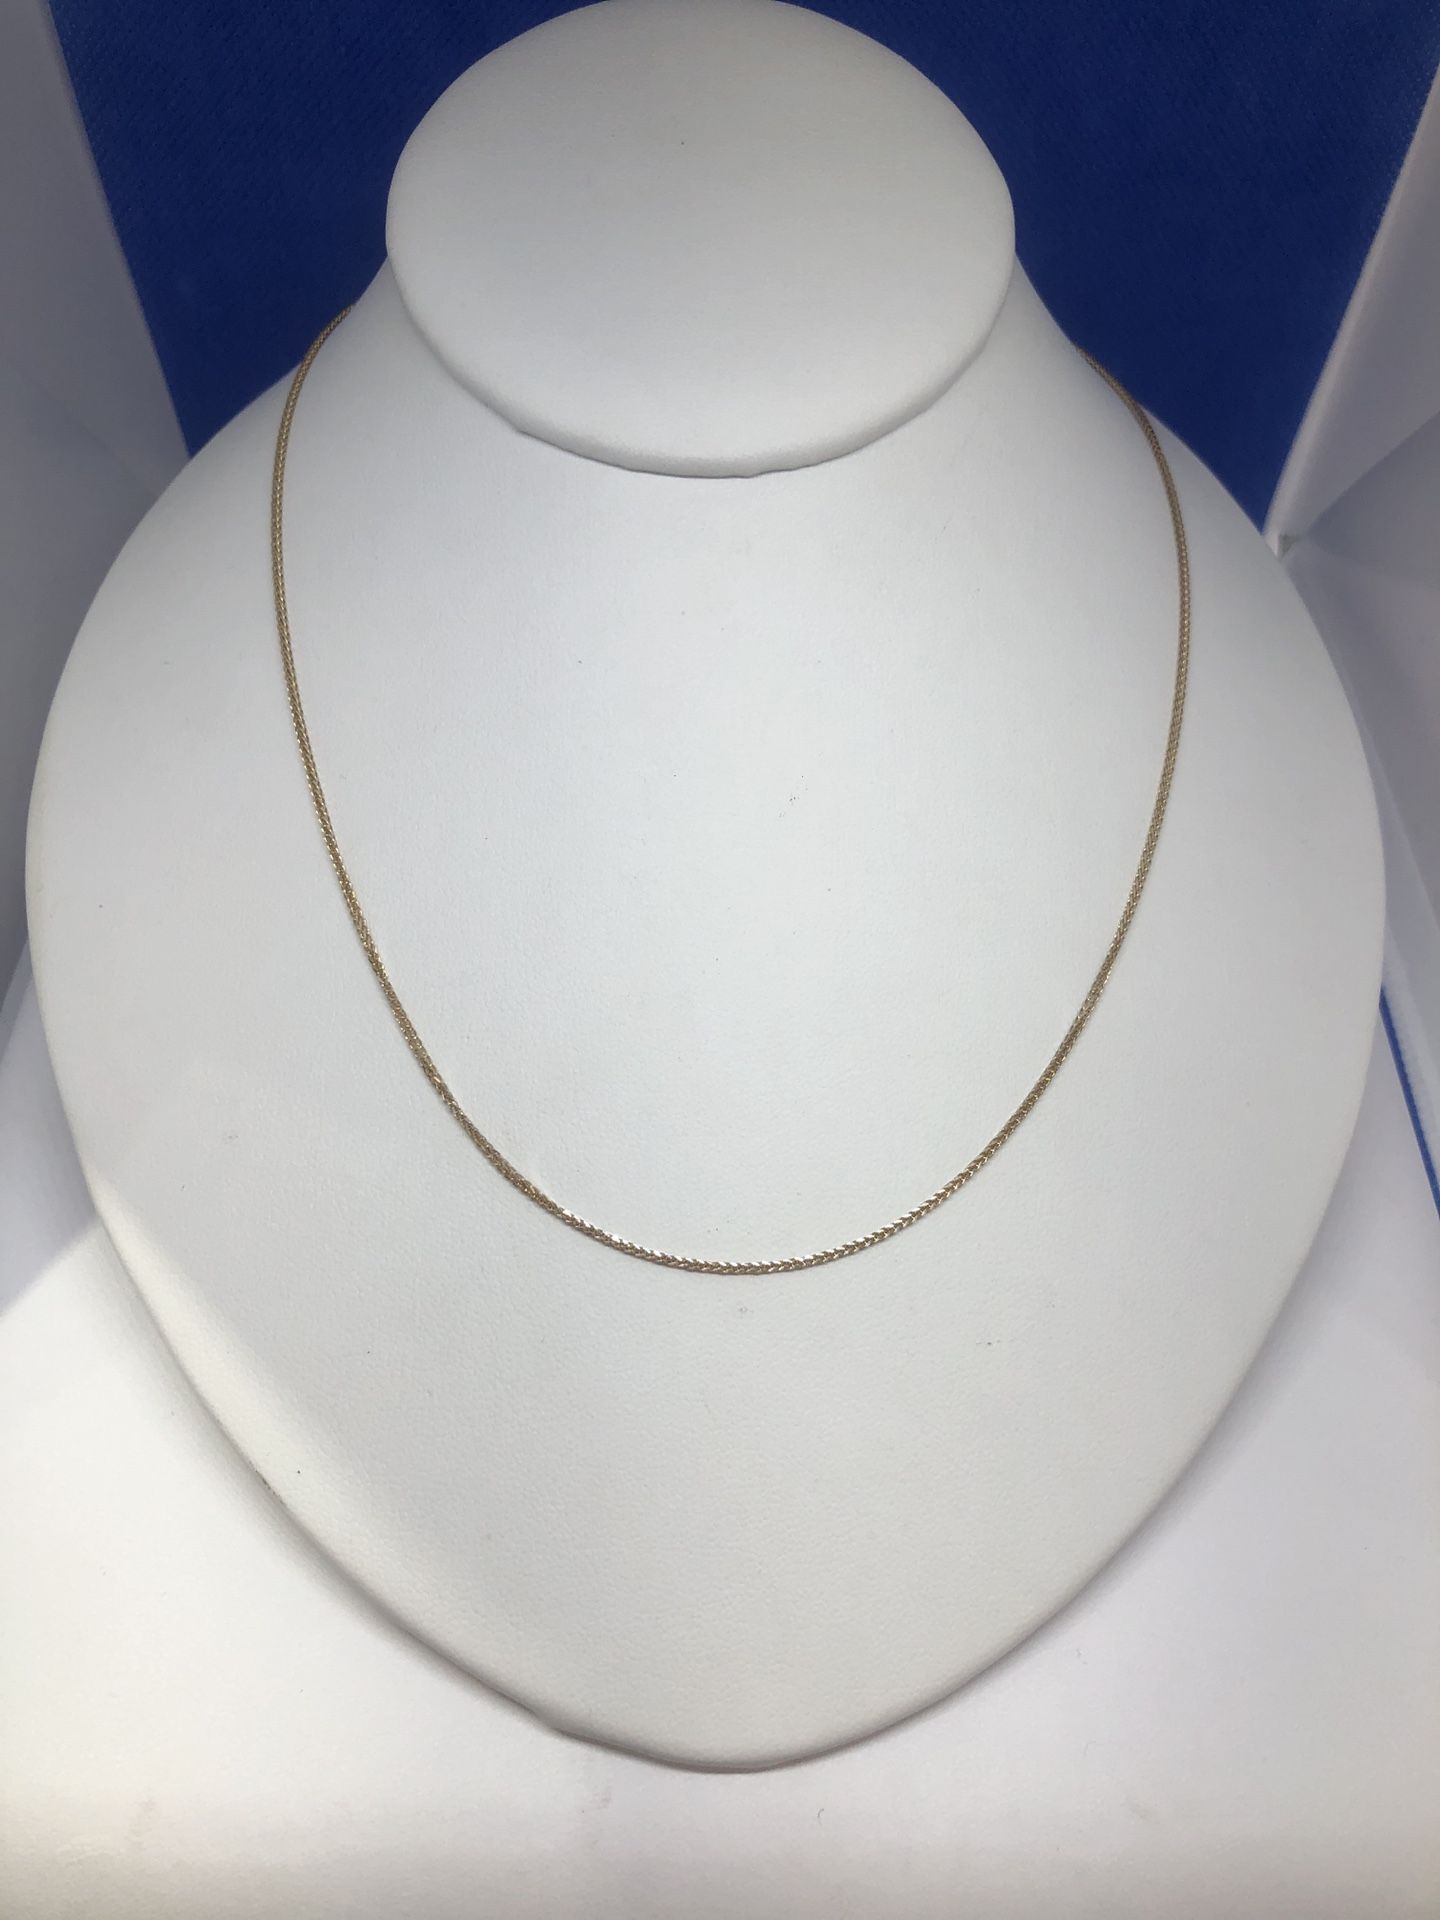 Beautiful 14k Gold Foxtail Link Necklace 18"